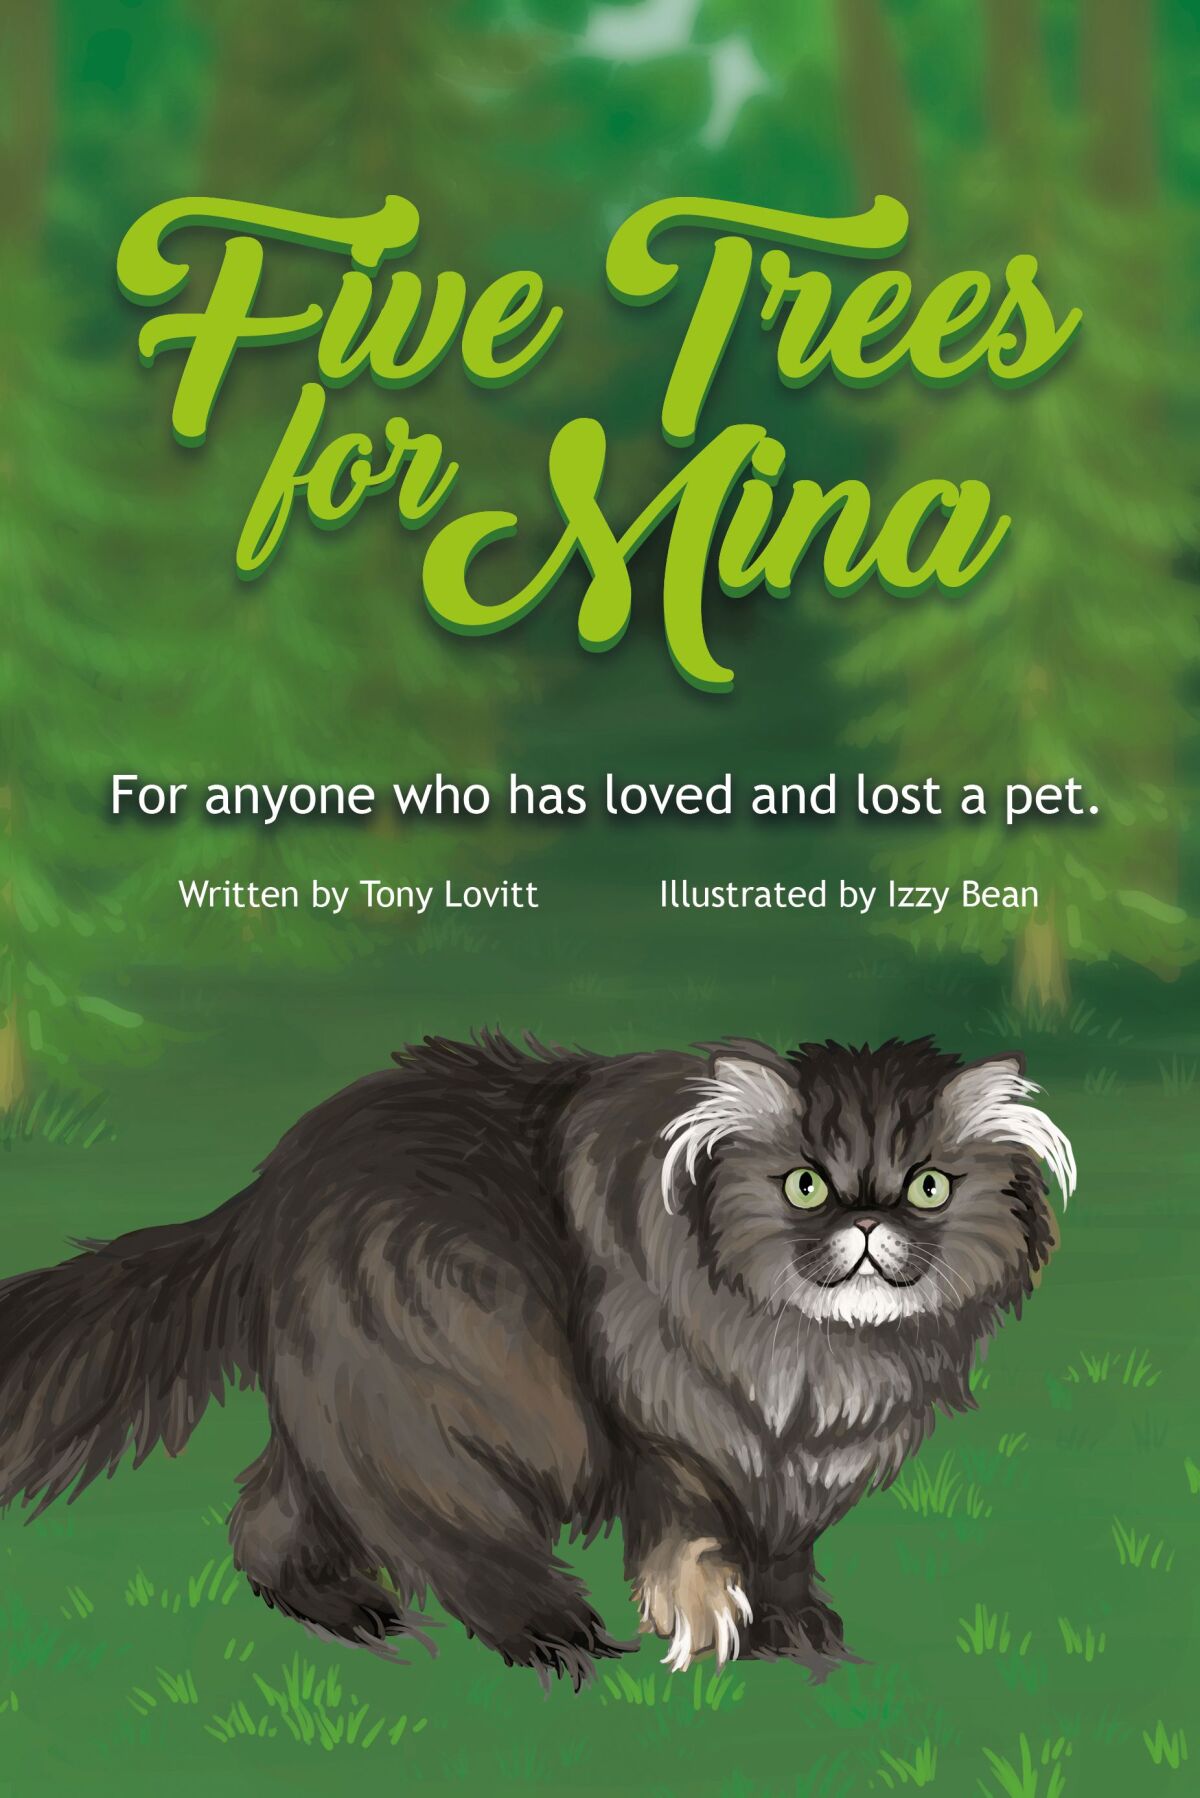 "Five Trees for Mina" by La Jolla Village resident Tony Lovitt tells about the loss of a beloved pet. He describes the writing as a "cathartic experience."